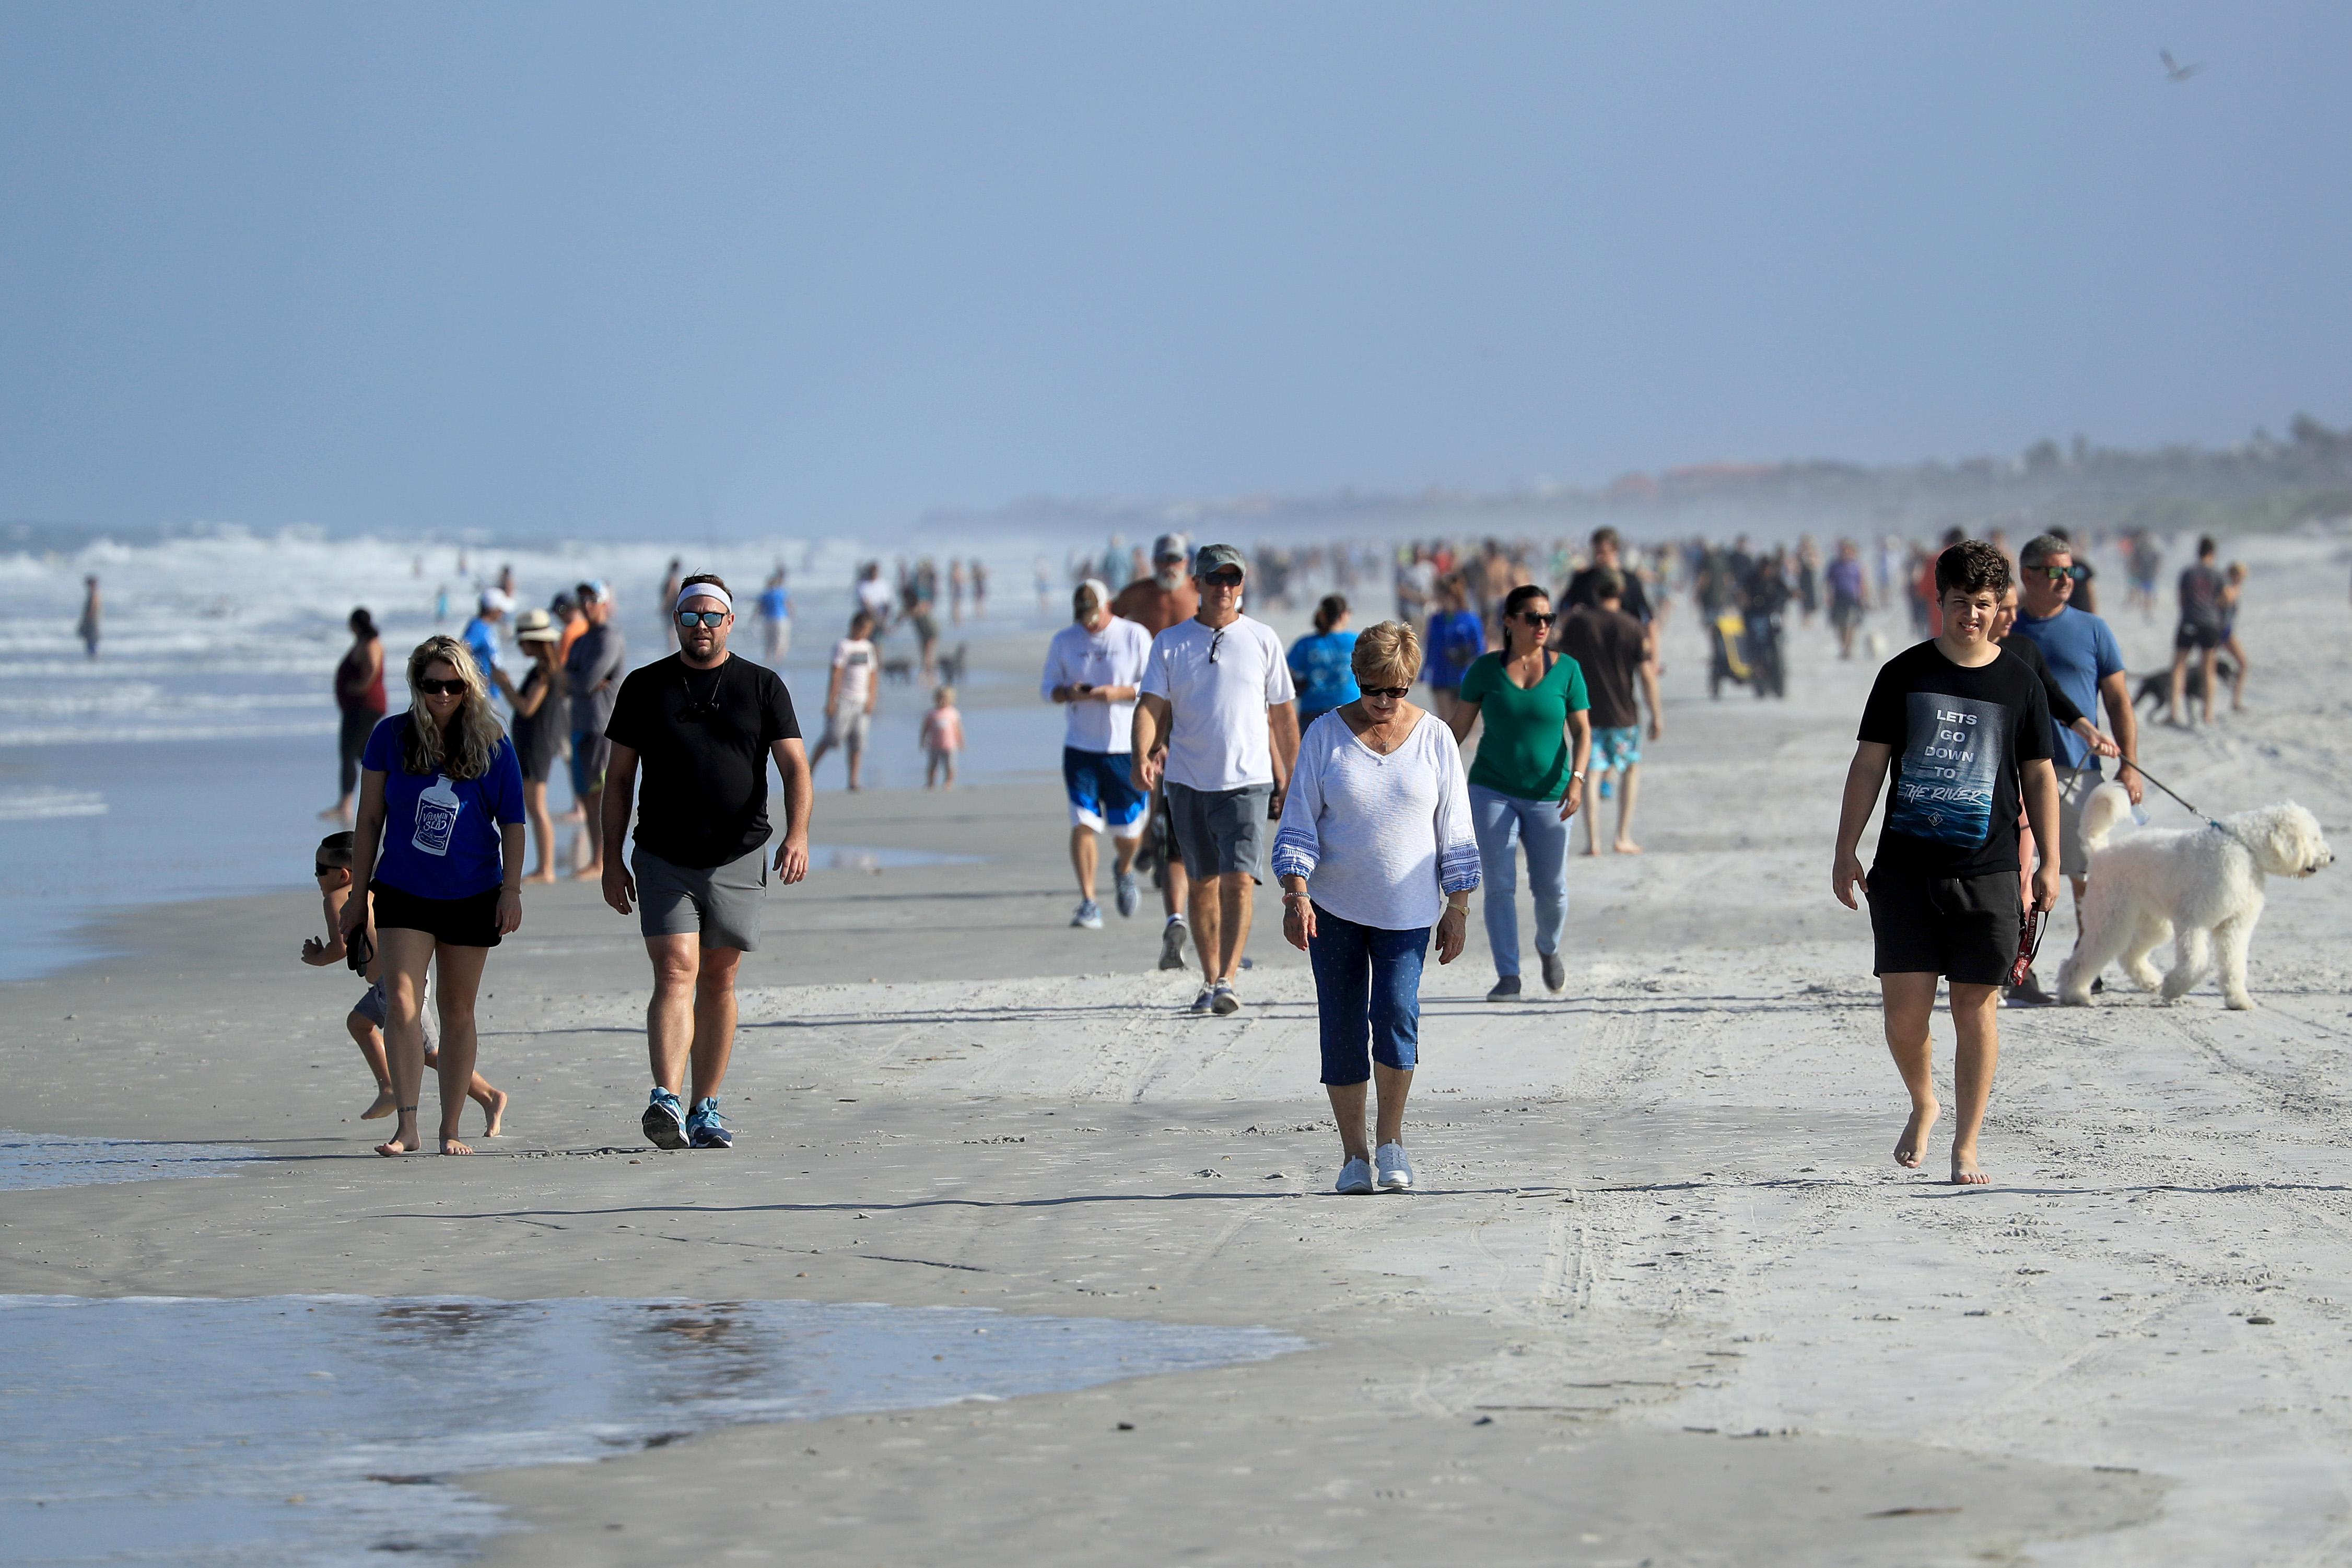 Many people walking on the beach